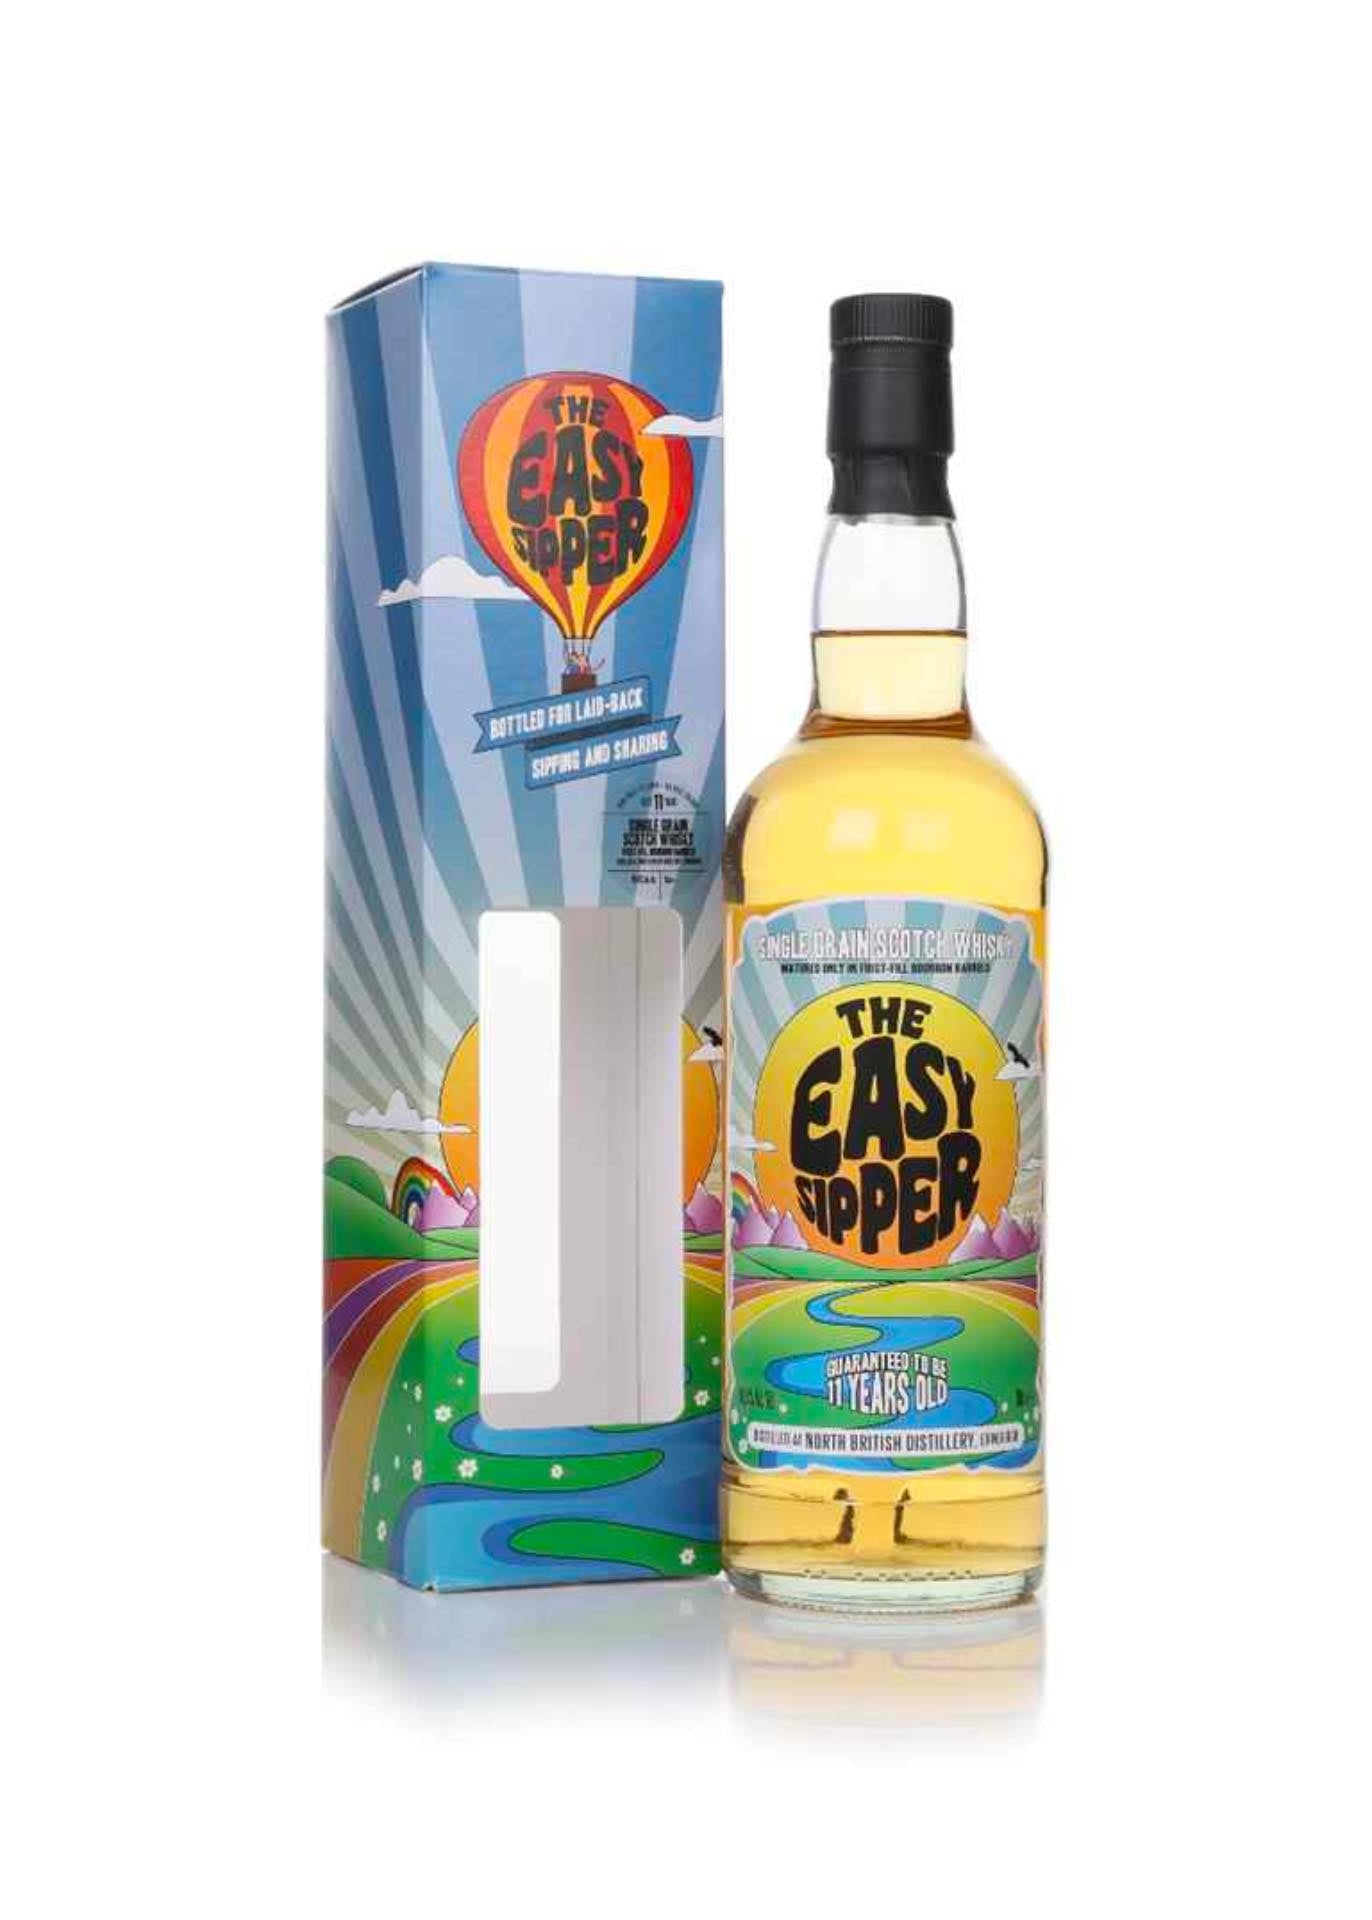 Easy Sipper North British 11 Year Old Single Grain